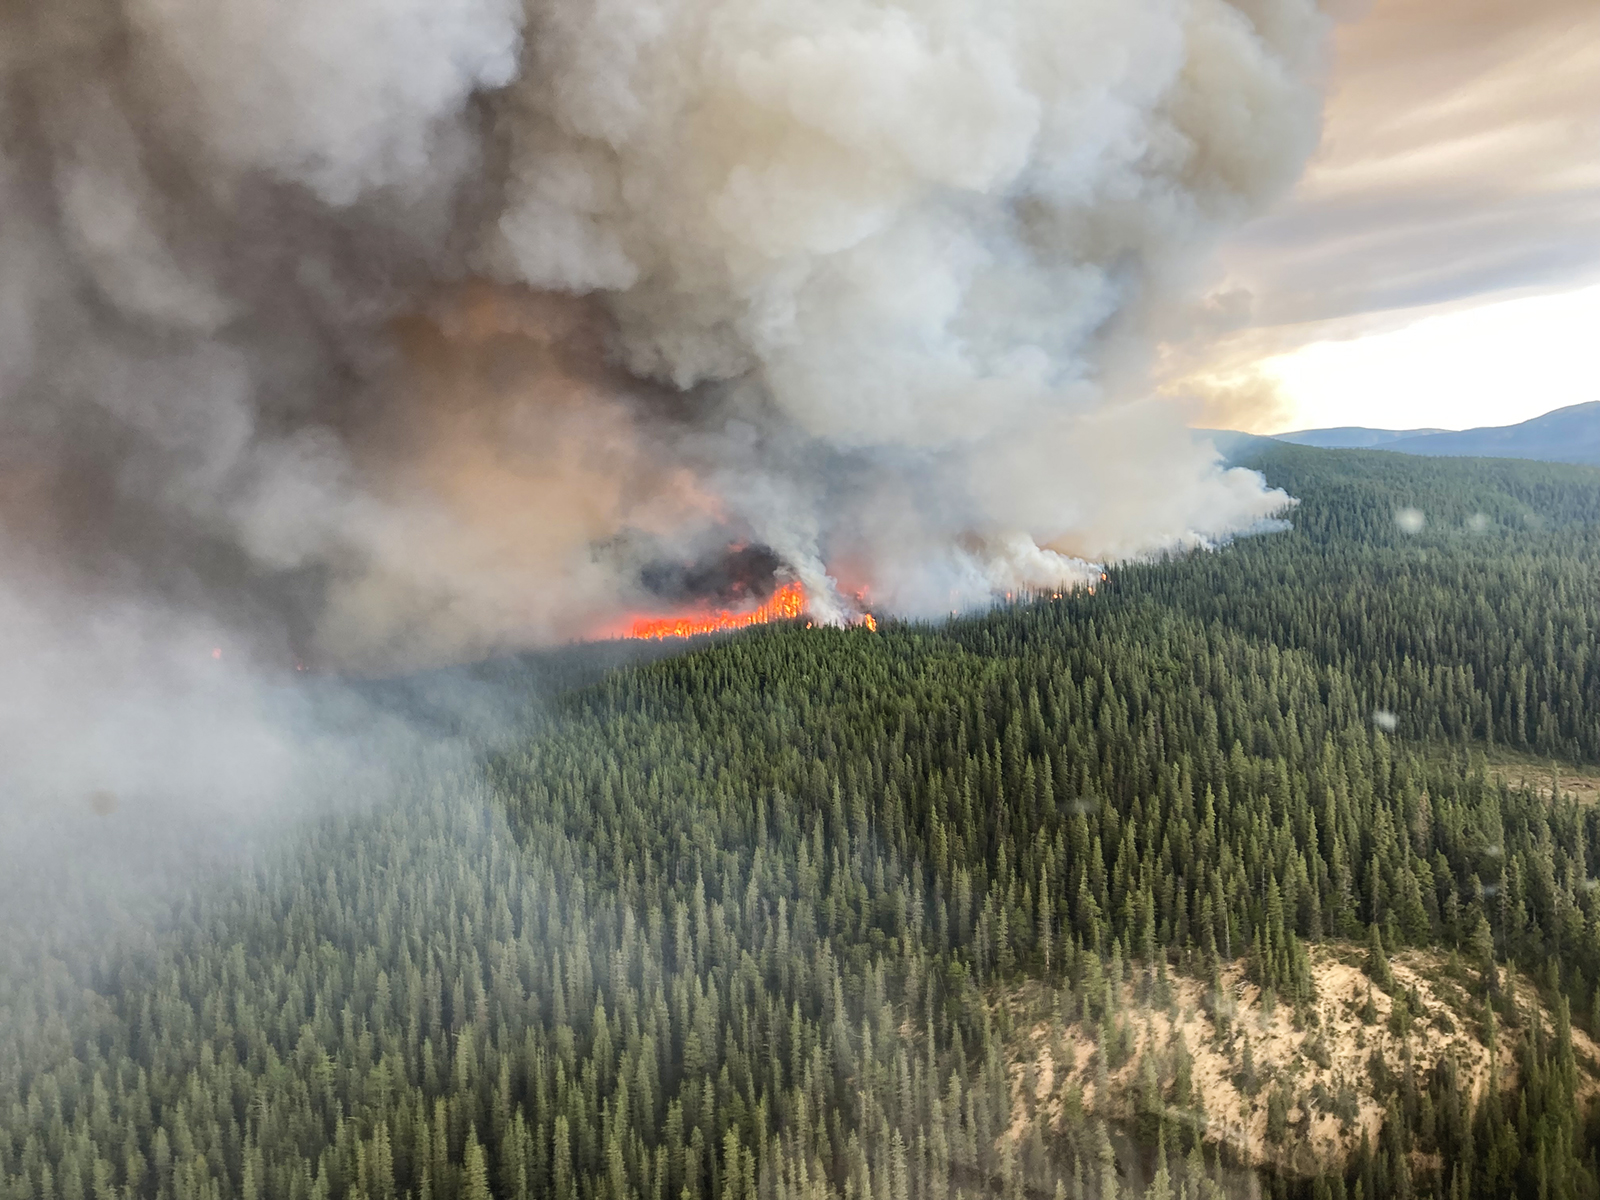 An aerial view of wildfire of Tatkin Lake in British Columbia, Canada on July 10.